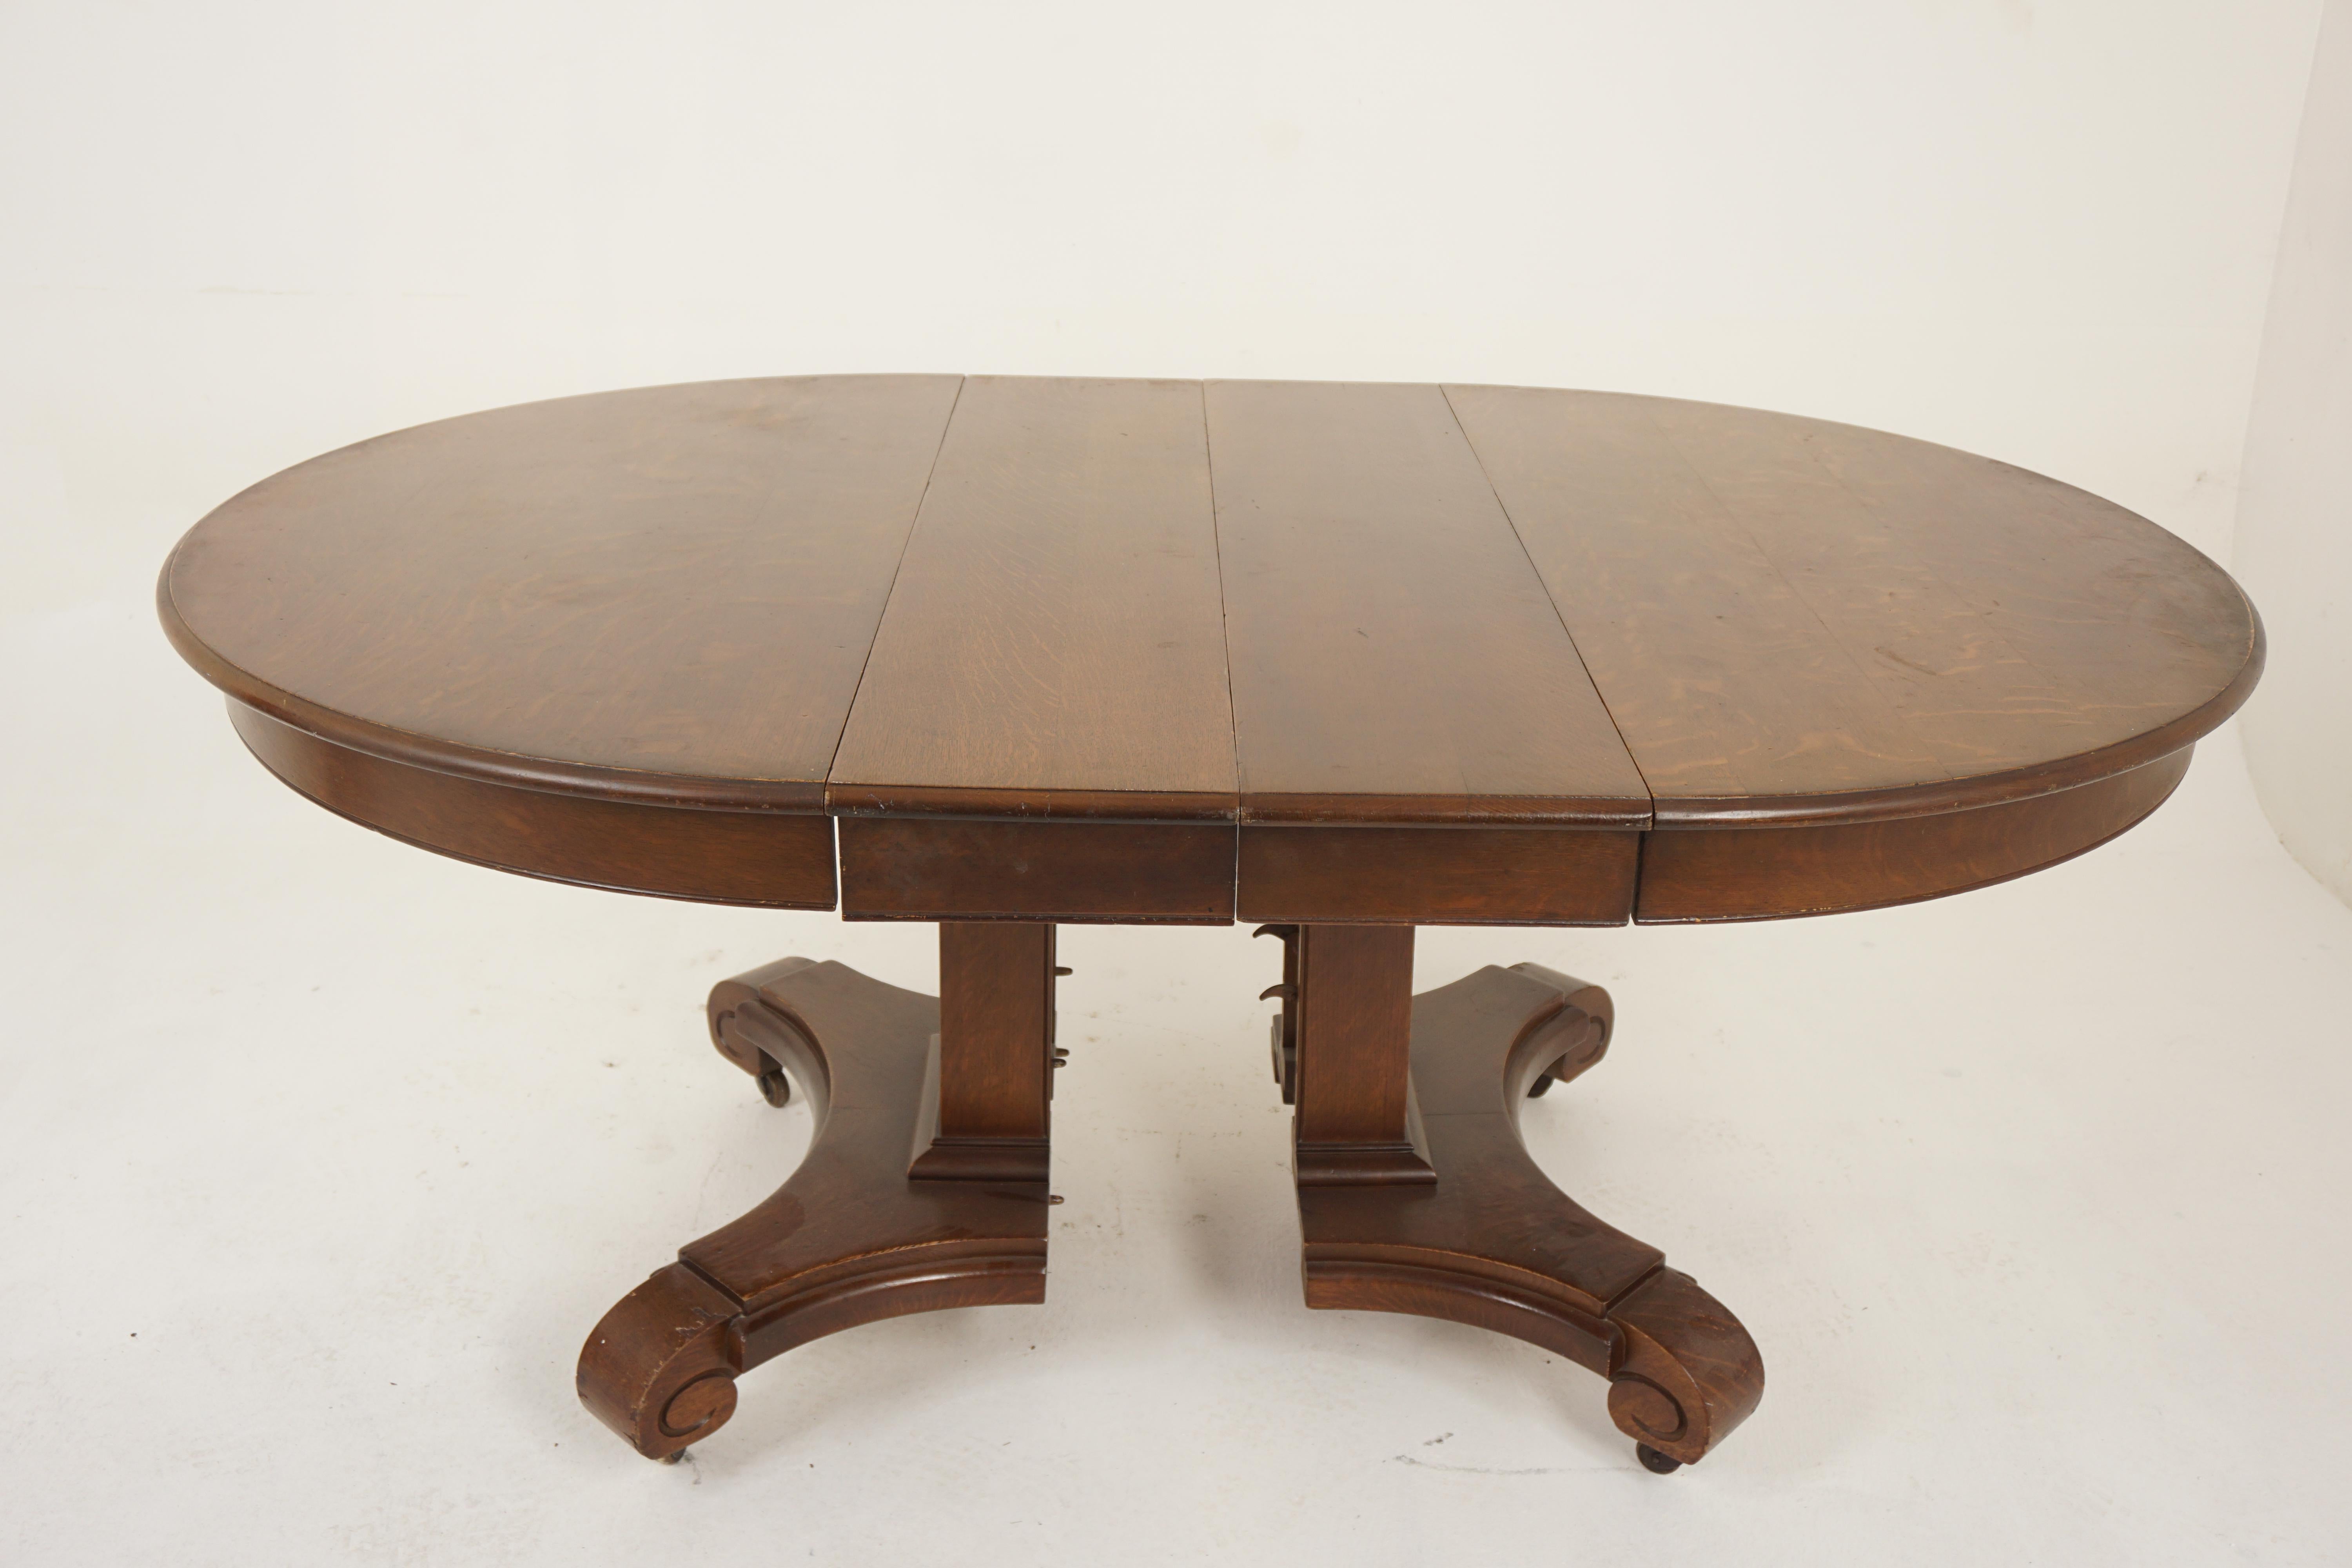 Scottish Mission Tiger Oak Arts & Crafts Round Dining Table 3 Leaves, America 1920, H1197